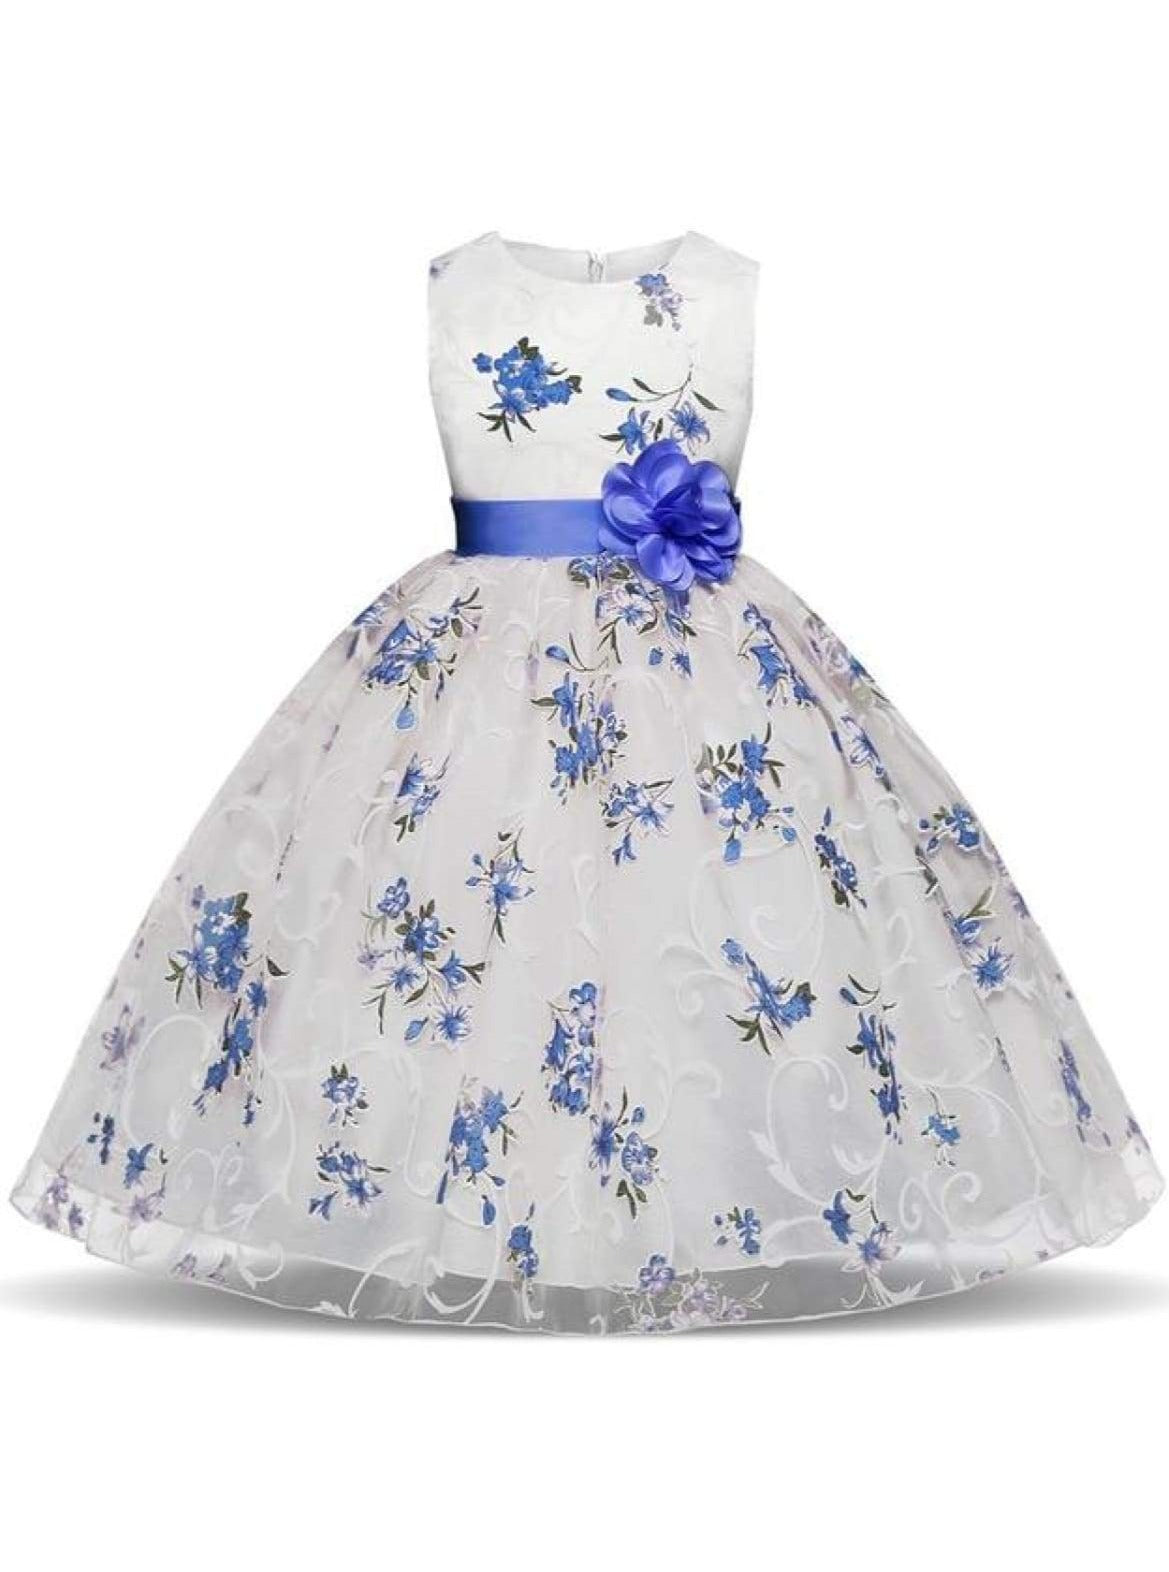 Girls Sleeveless Floral Print Special Occasion Party Dress with Flower Sash - Blue / 3T - Girls Spring Dressy Dress